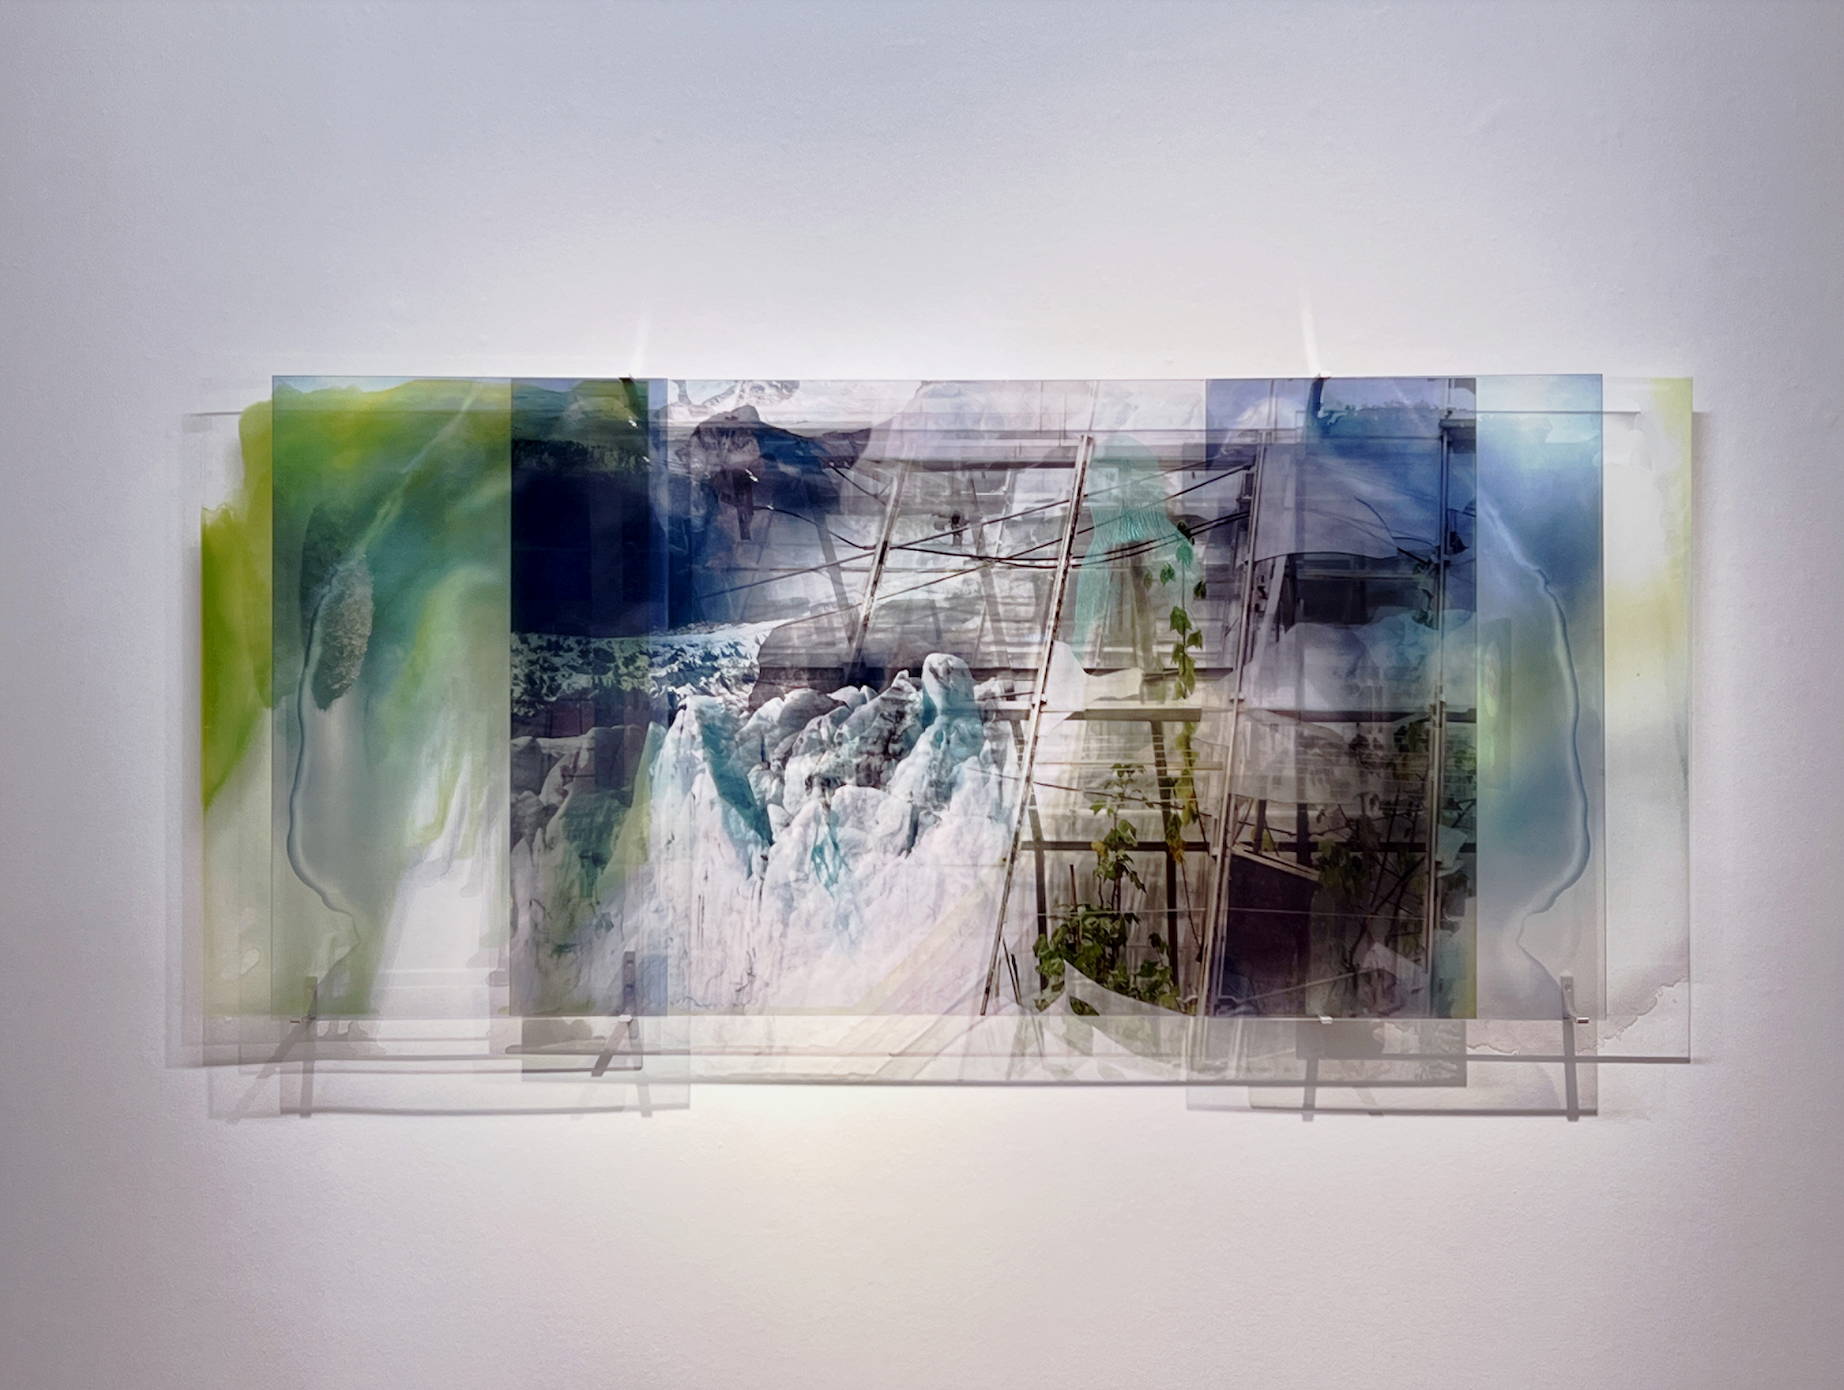   JANET LAURENCE  Once were Forests, from the Glacial Glasshouse series 2022 Duraclear on shinkalite acrylic, oil pigment 100 x 235 x 10 cm  